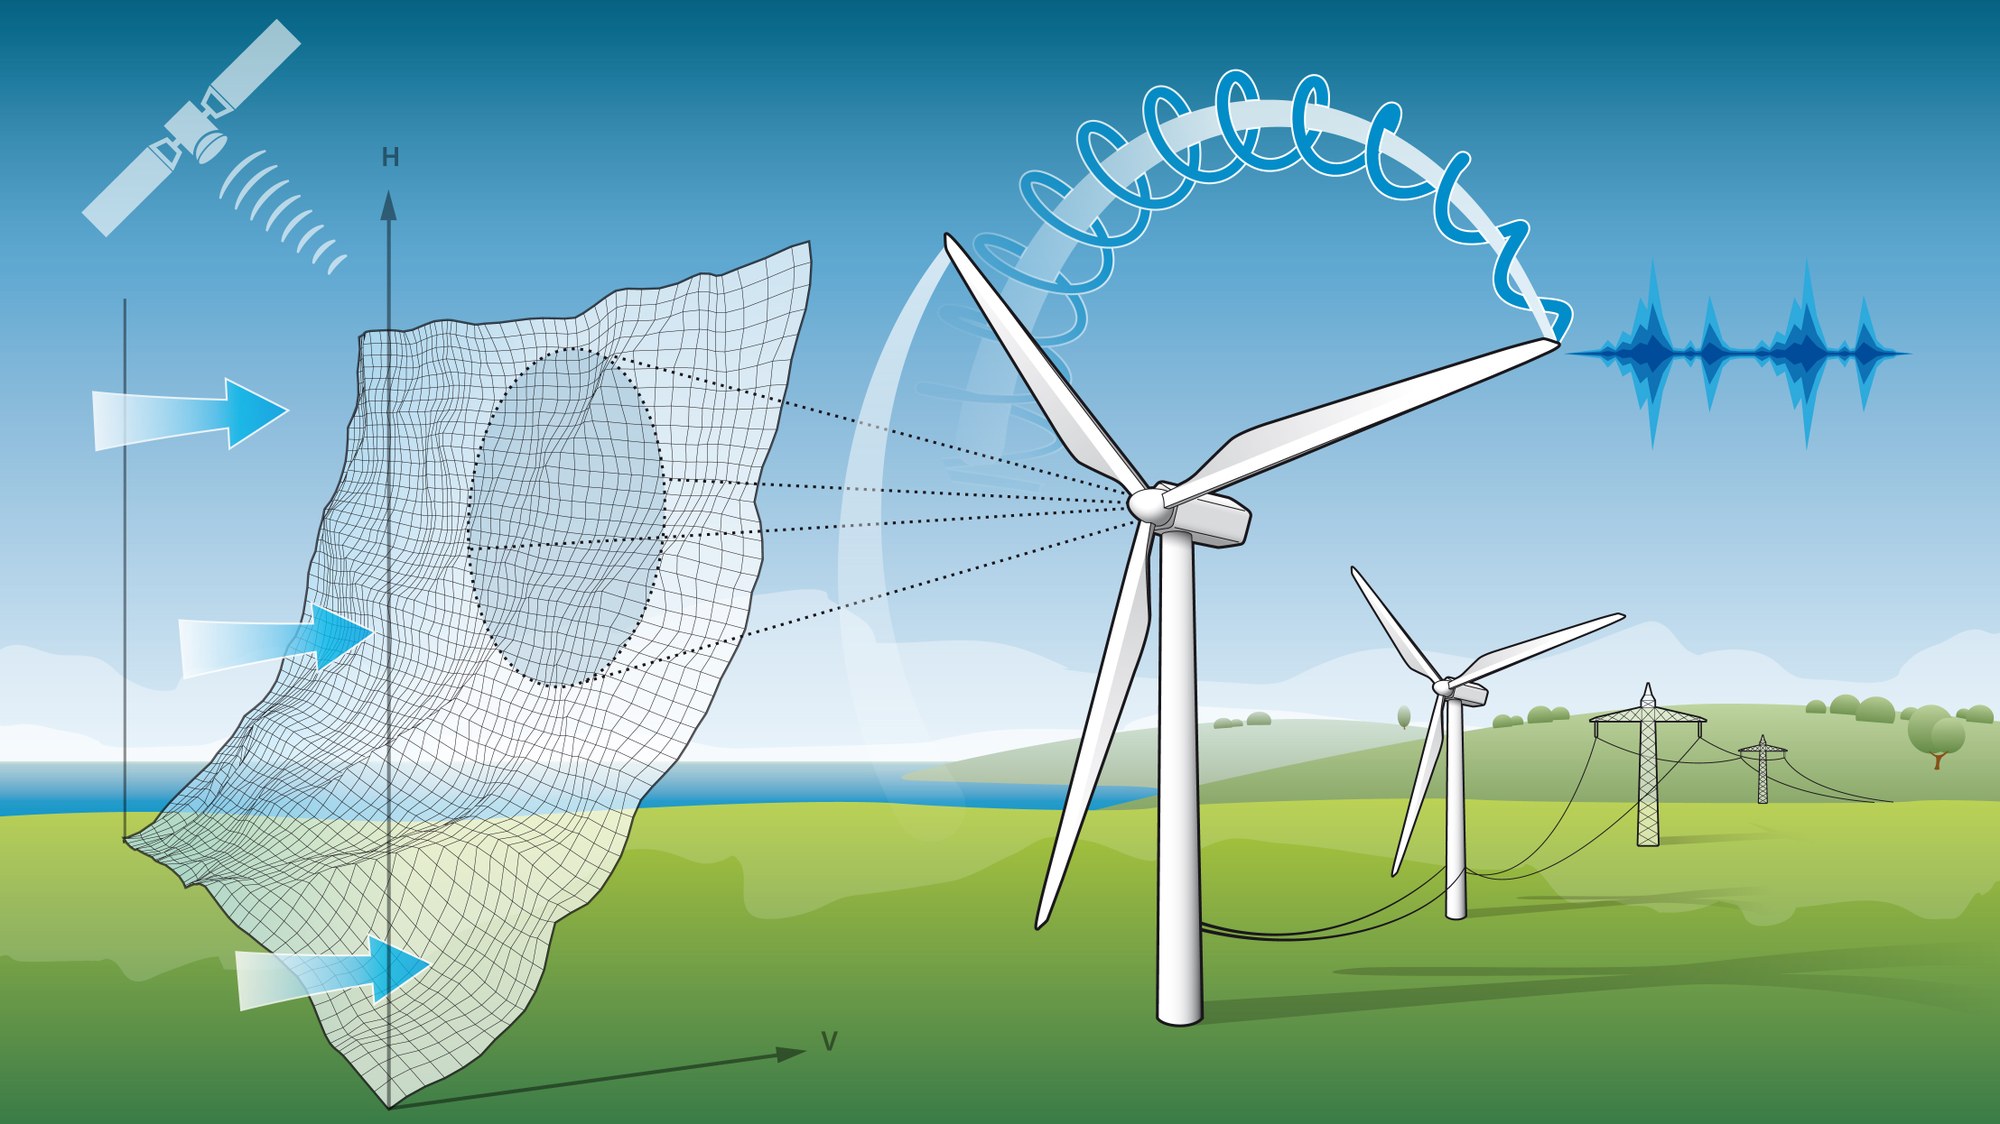 Precise wind forecasts enable a better wind power plant control